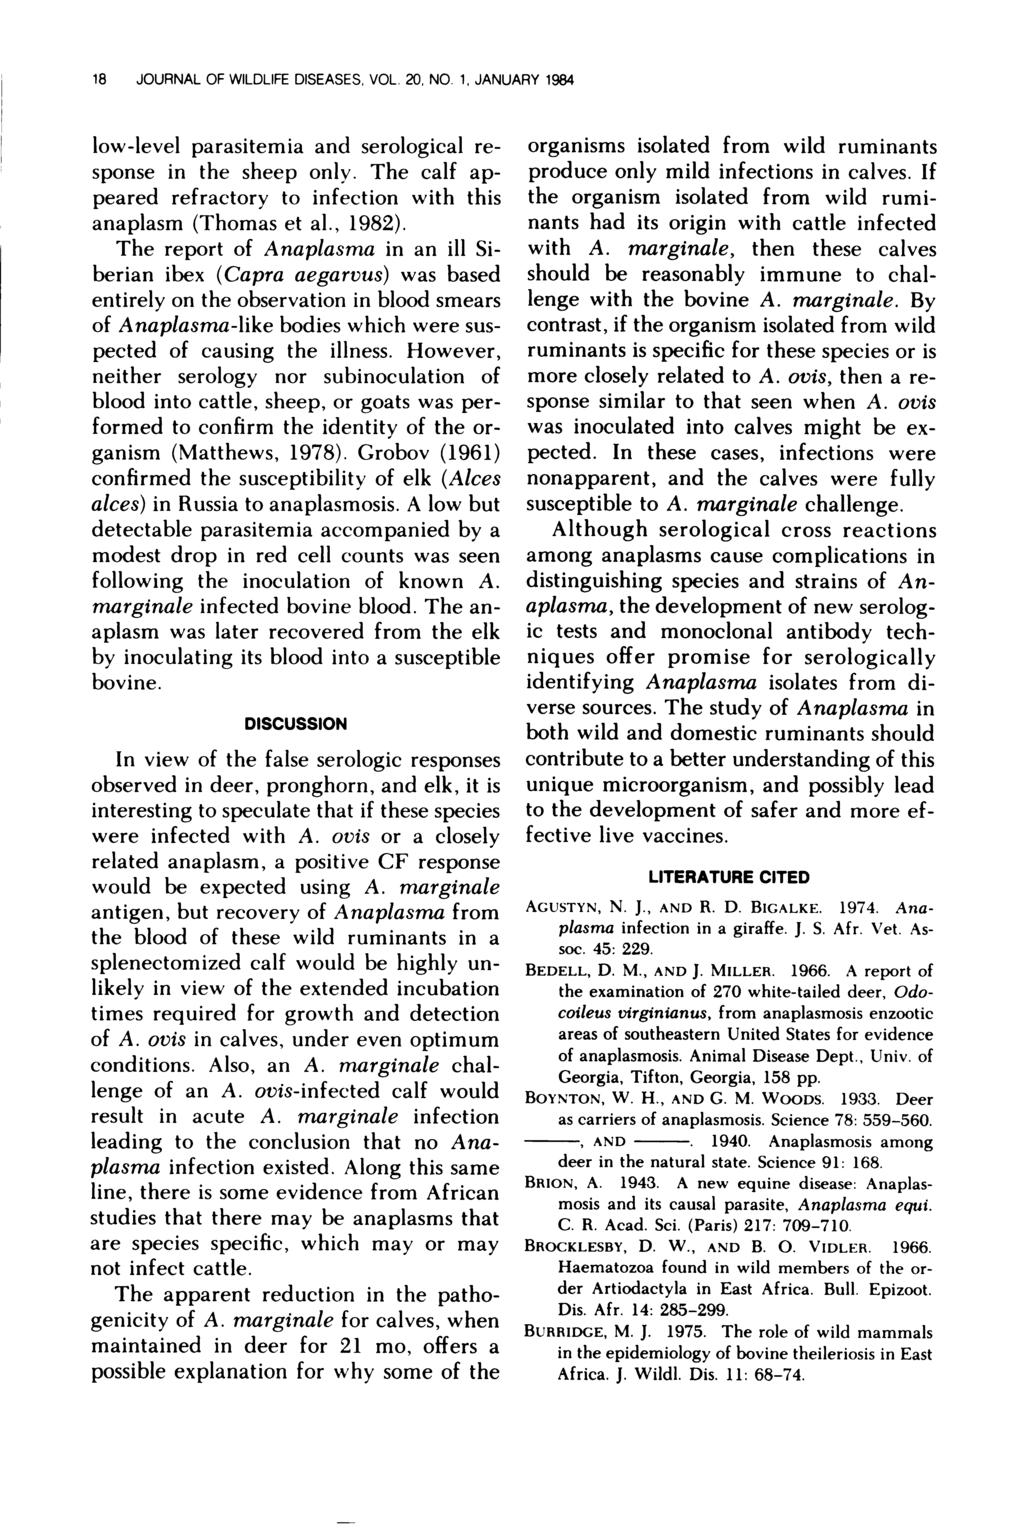 18 JOURNAL OF WILDLIFE DISEASES, VOL. 20, NO. 1, JANUARY 1984 low-level parasitemia and serological response in the sheep only.